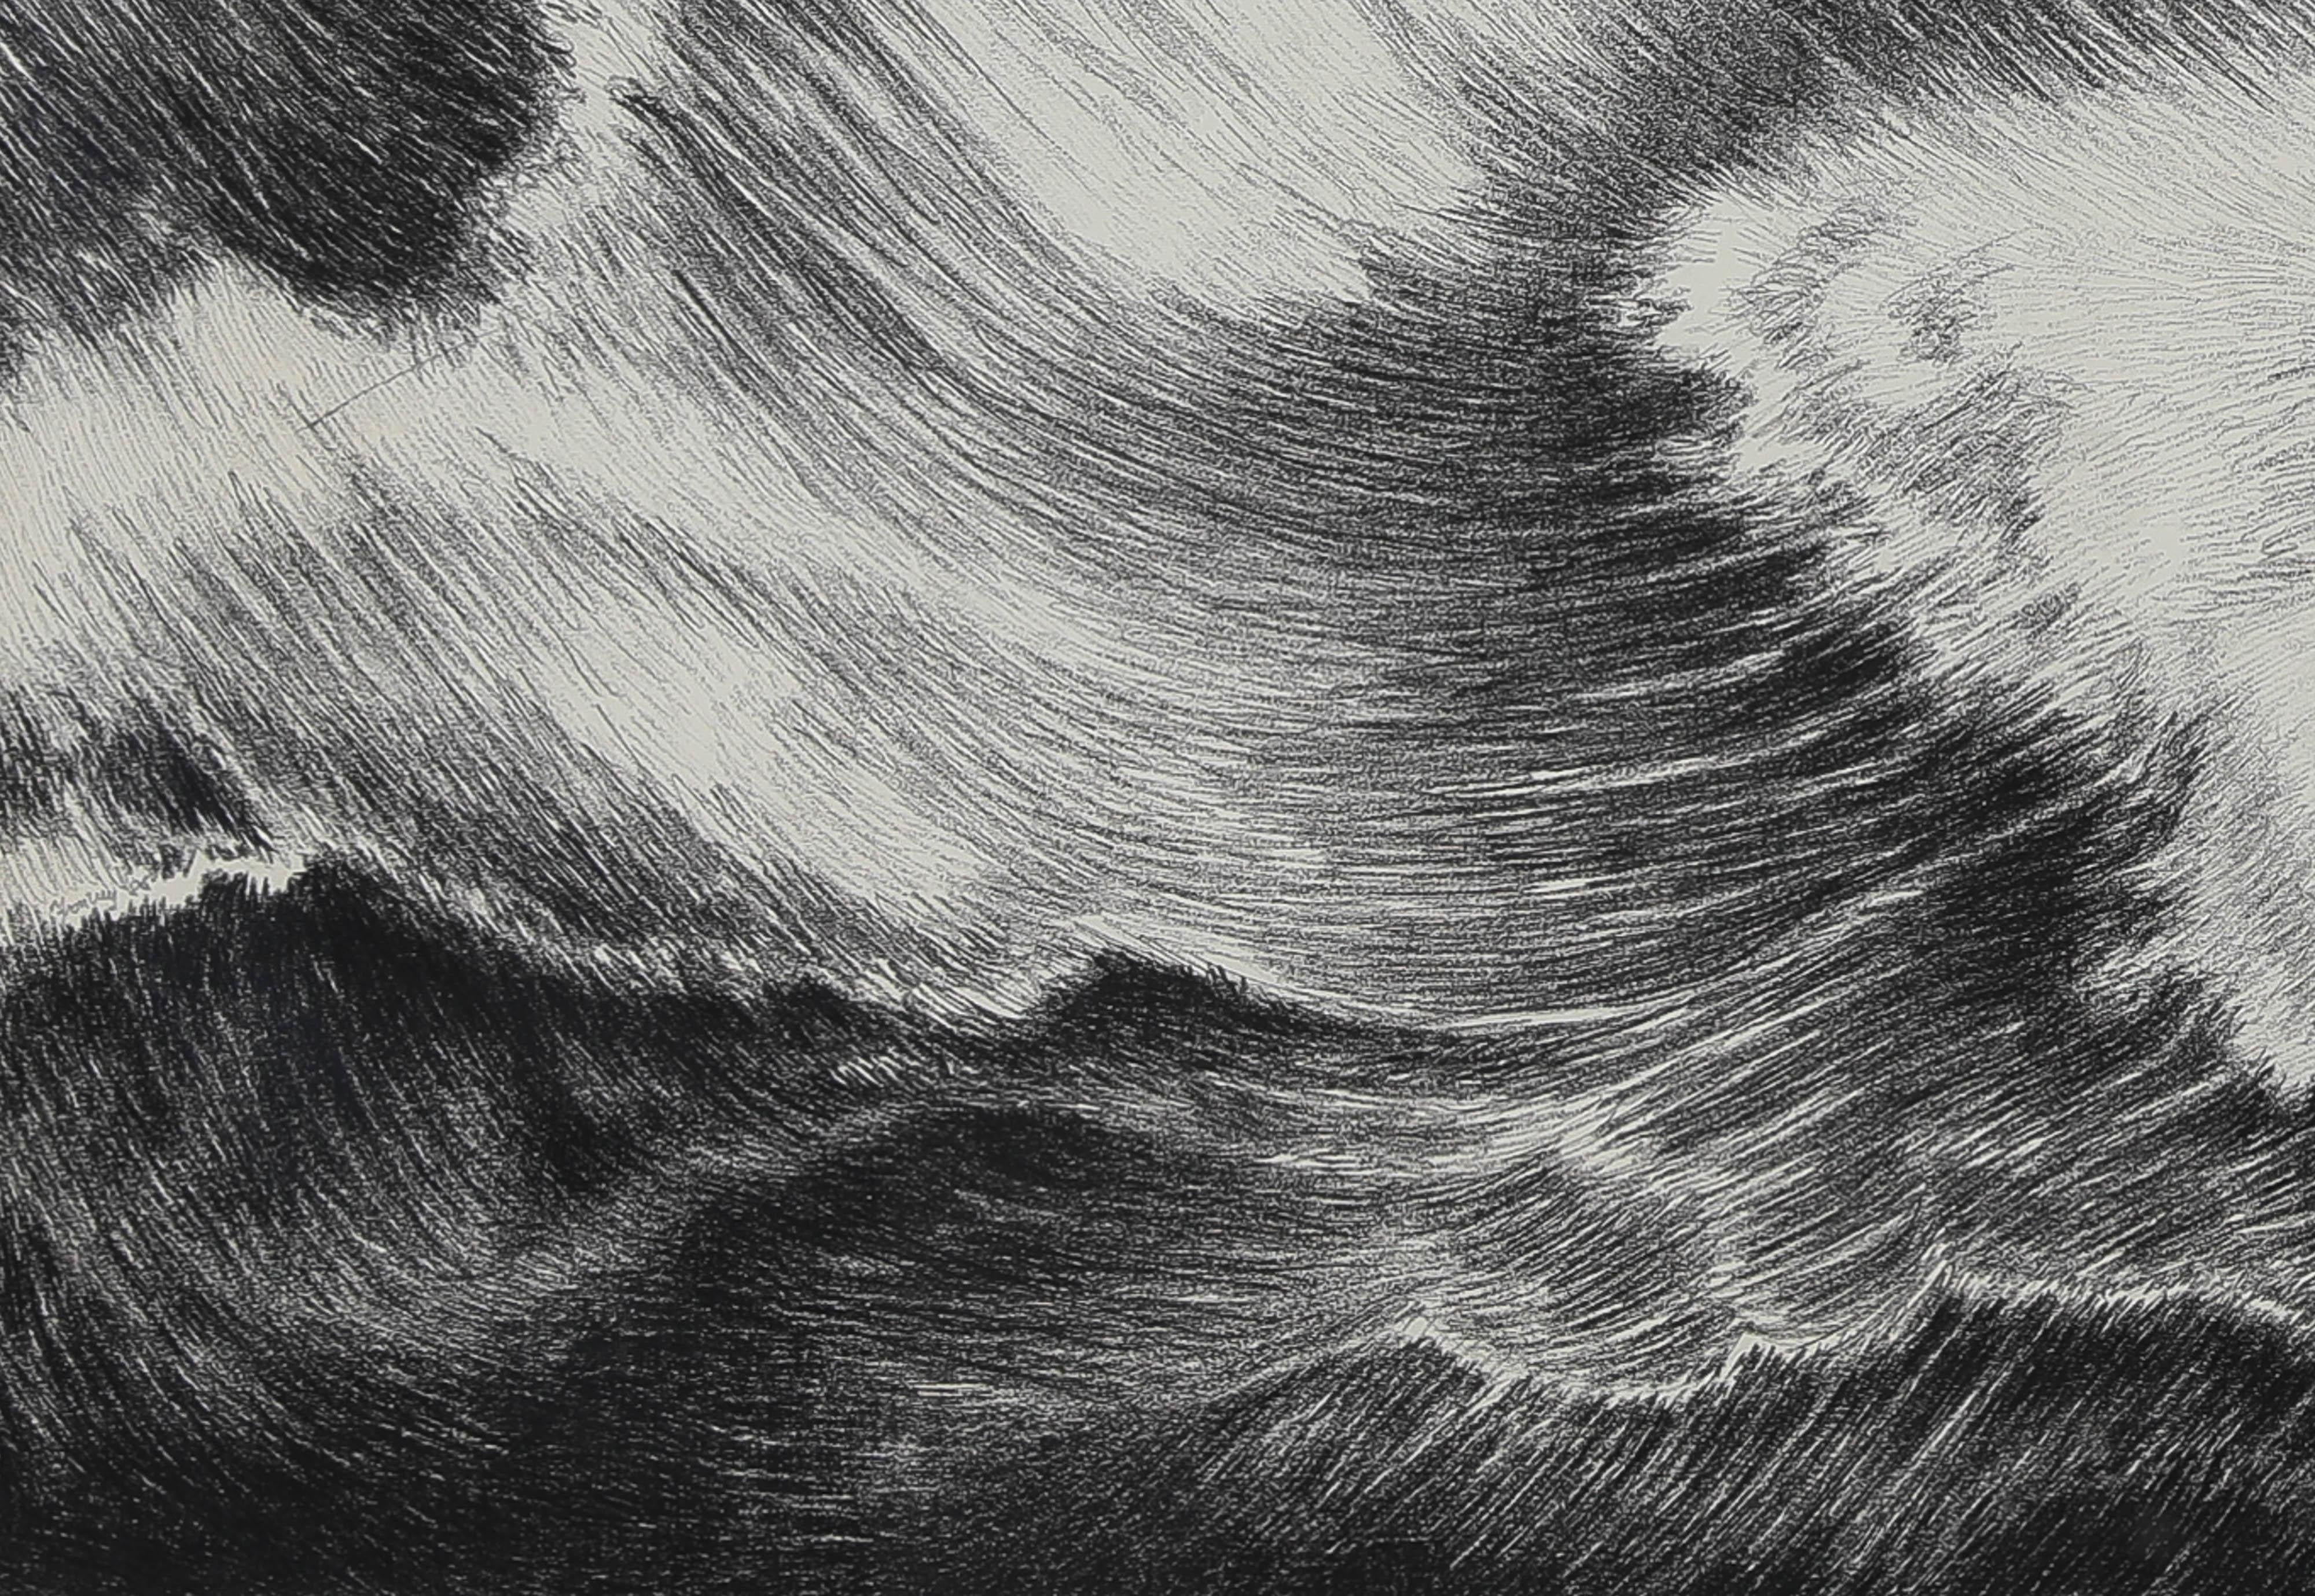 Waves by Yvon Pissarro (b. 1937)

Conté chalk on paper
70 x 100 (27 ¹/₂ x 39 ³/₈ inches)
Signed and dated Yvon Pissarro 1986

Provenance
Studio of the artist, Montpellier

Artist biography
The son of Paulémile and grandson of Camille Pissarro, Yvon